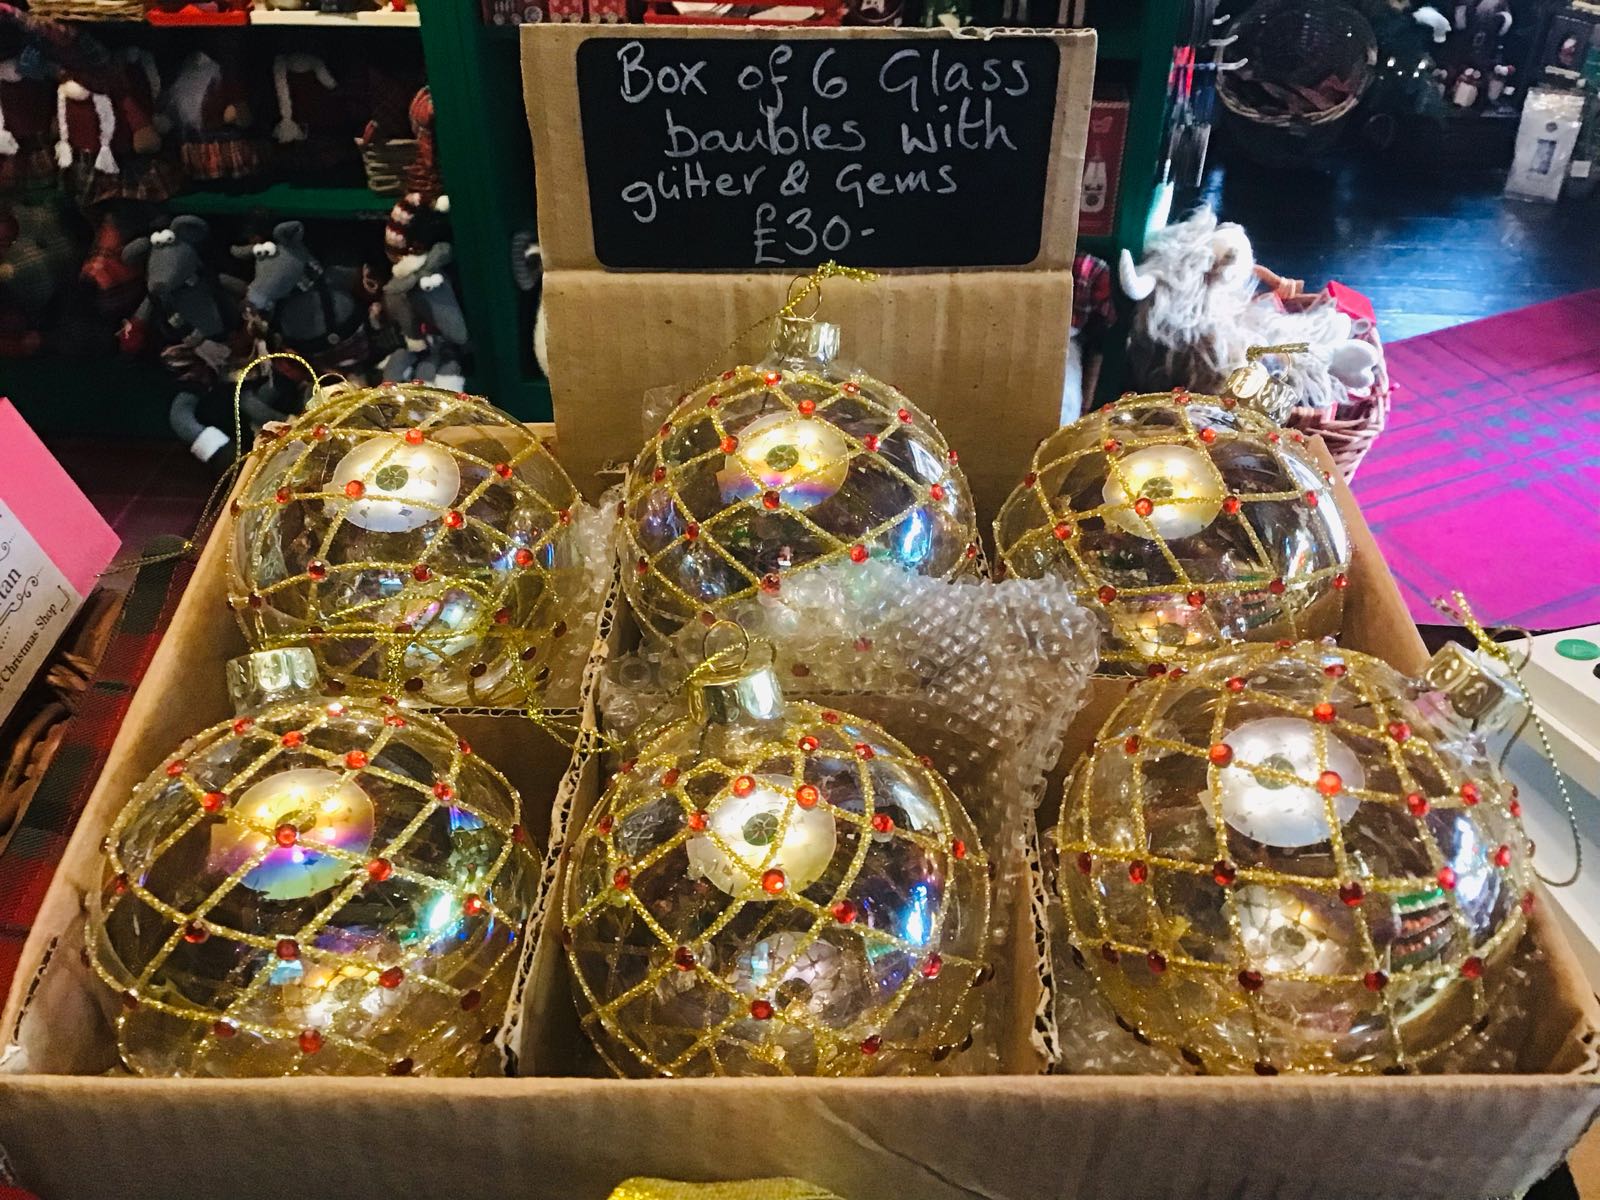 Box of 6 glass baubles with gold glitter and red gems